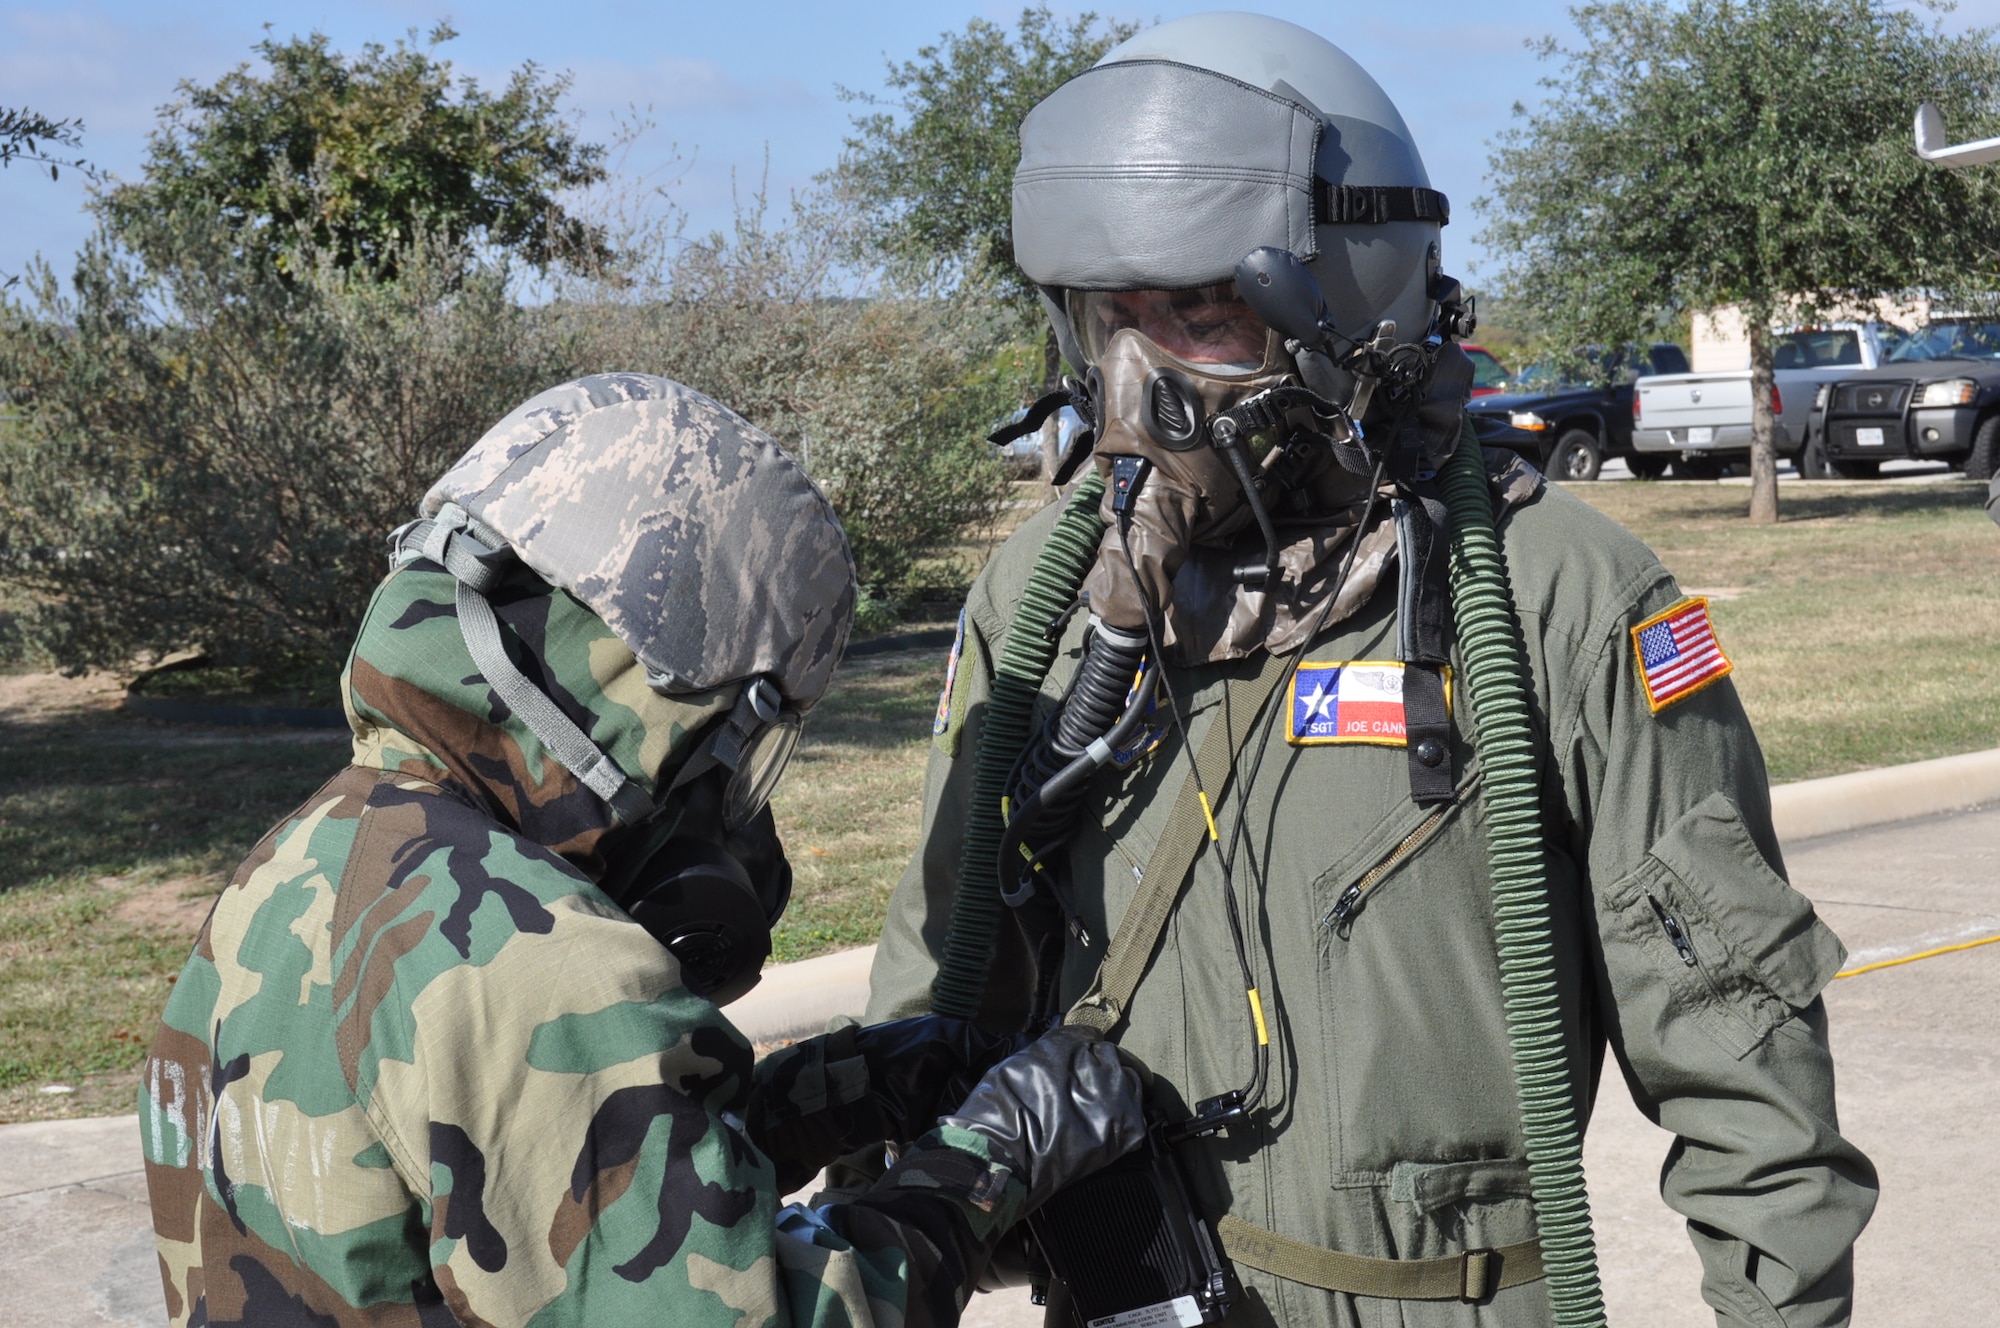 Tech. Sgt. Joseph Cannella, 68th Airlift Squadron loadmaster, goes through the decontamination process after a simulated chemical, biological, radiological and nuclear attack during an Ability to Survive and Operate training exercise on Joint Base San Antonio-Lackland, Texas on Nov. 18, 2017. ATSO training is designed to provide Airmen opportunities to respond and react to external threats in a simulated deployed environment. (U.S. Air Force photo/Senior Airman Bryan Swink)